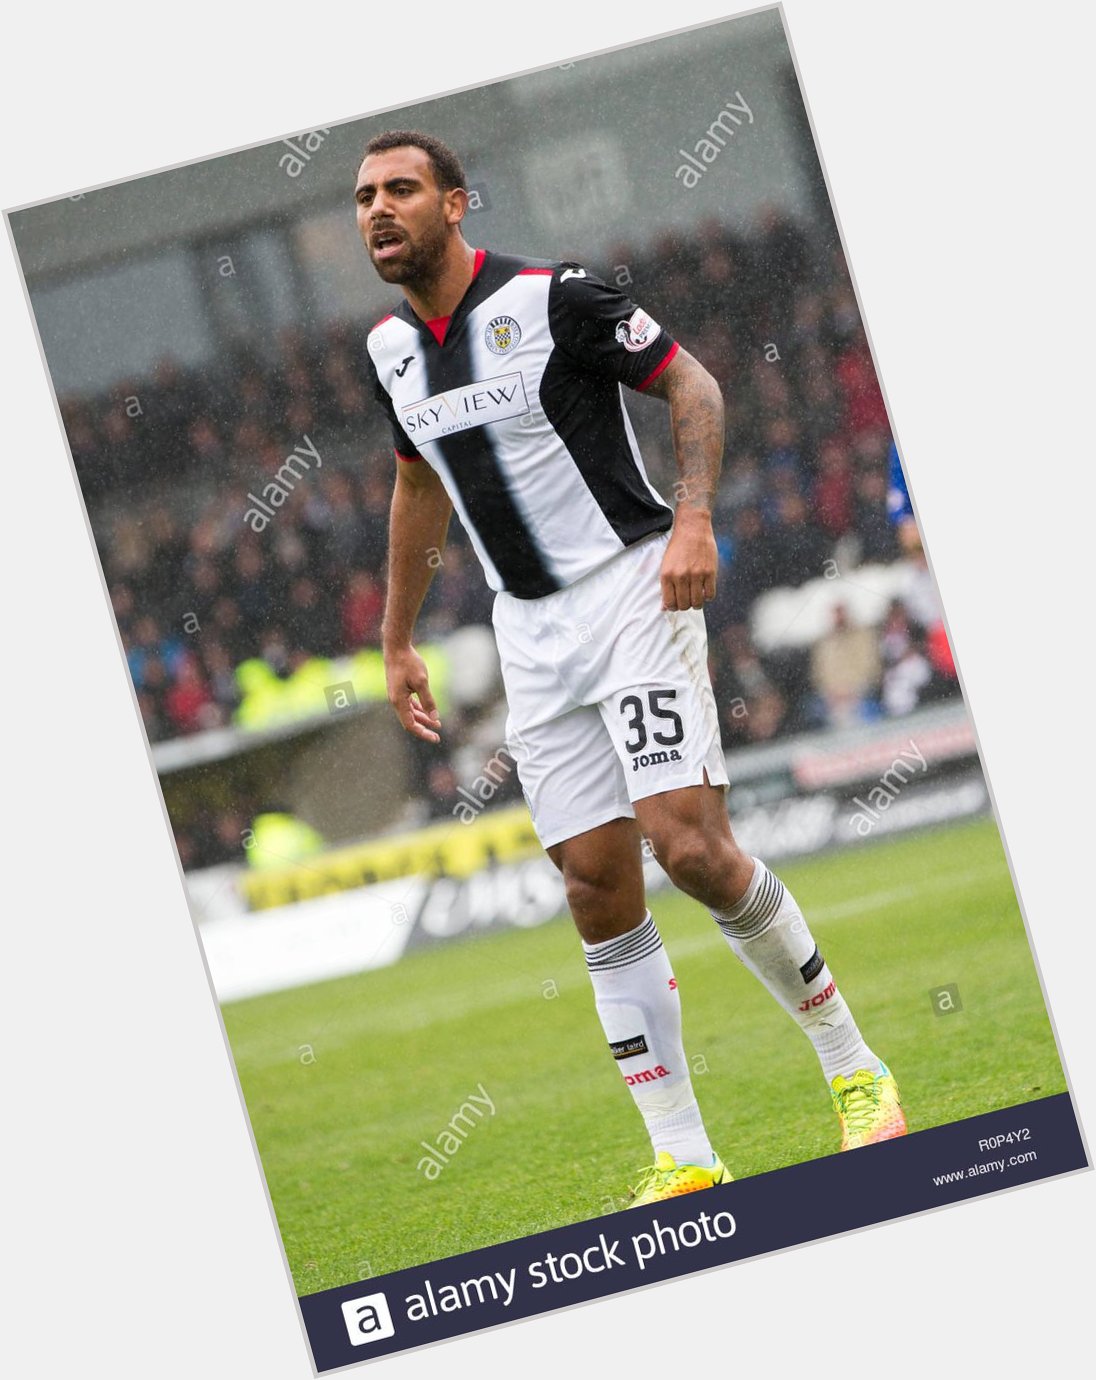  happy birthday from every one at St Mirren mate. Have a good one. 